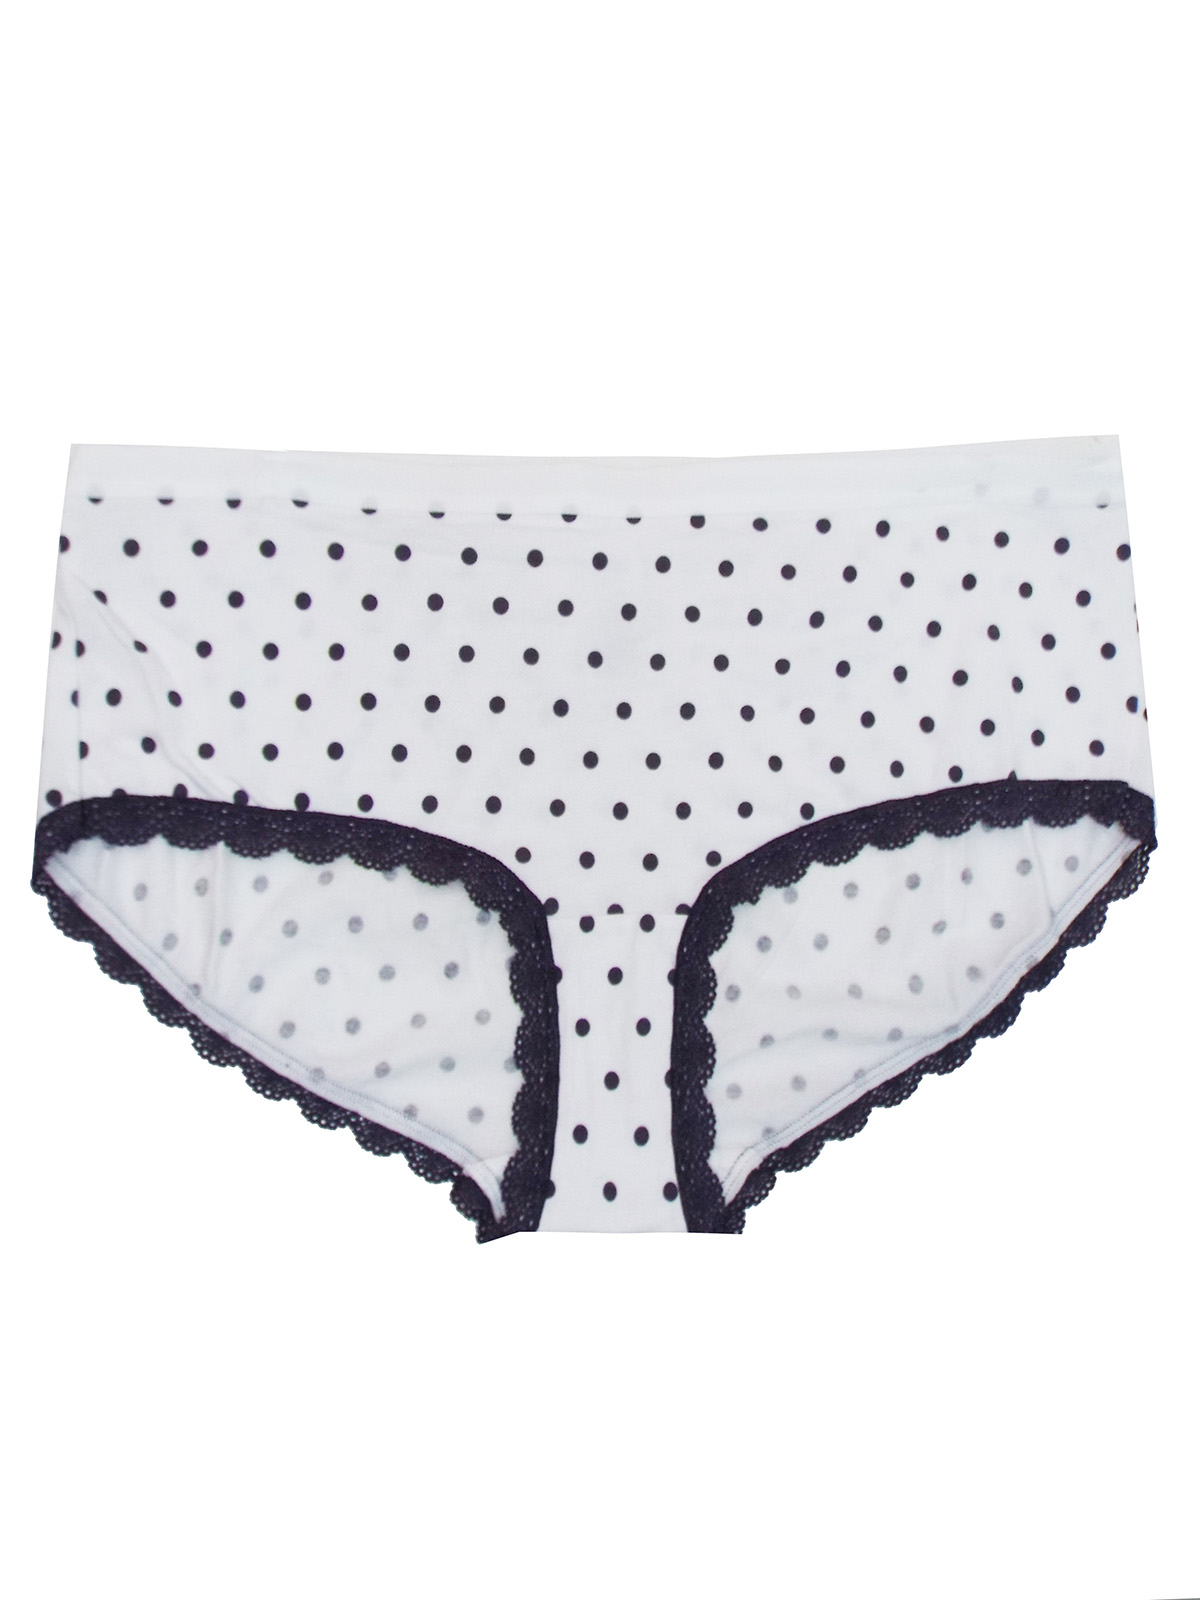 Marks and Spencer - - M&5 WHITE Cotton Rich Spotted Low Rise Shorts ...